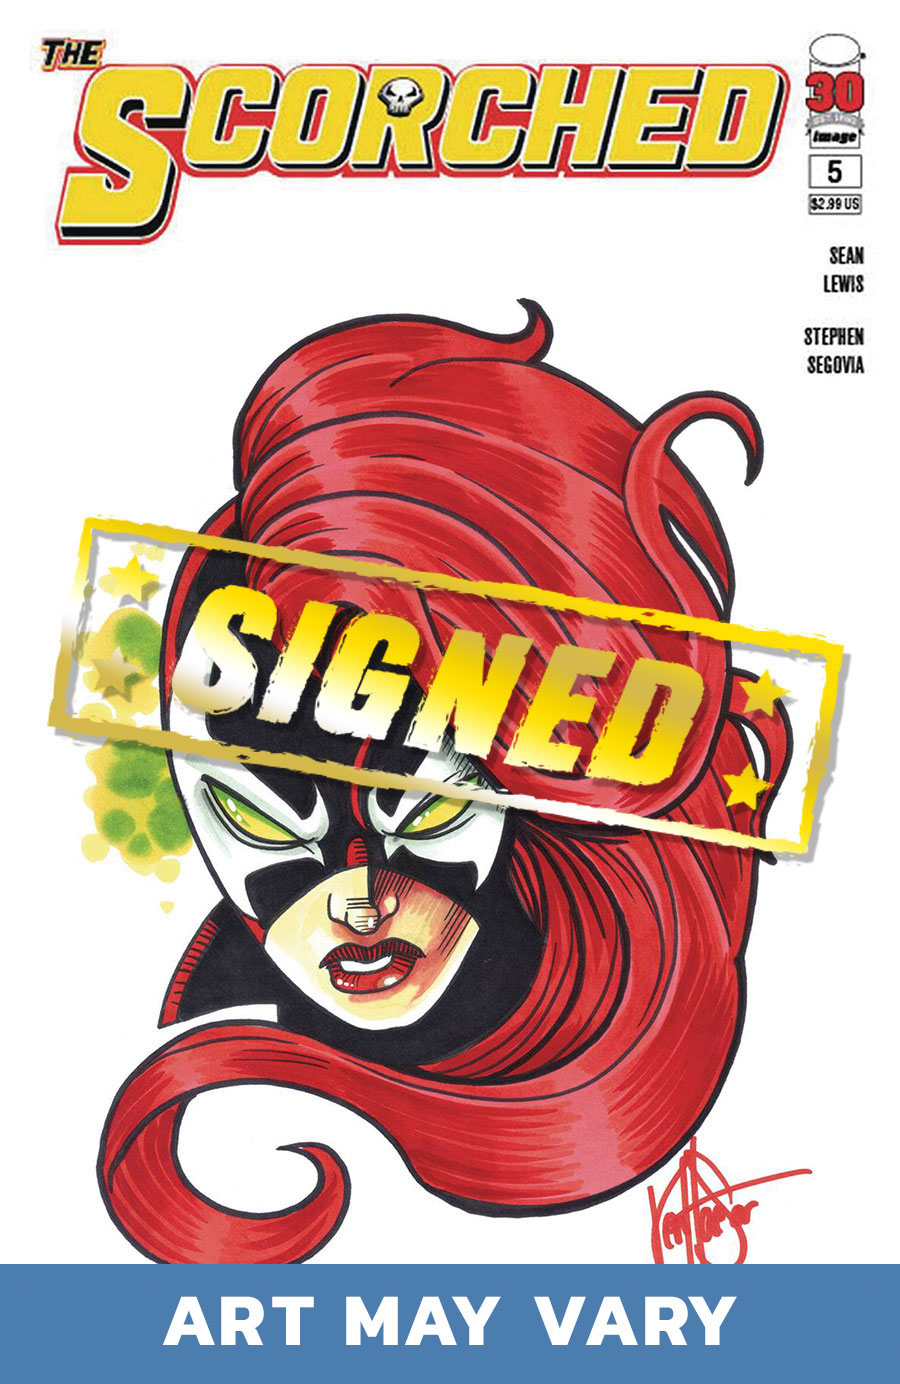 Scorched #5 Cover D DF Signed & Remarked By Ken Haeser With A Color She-Spawn Hand-Drawn Sketch (Filled Randomly)